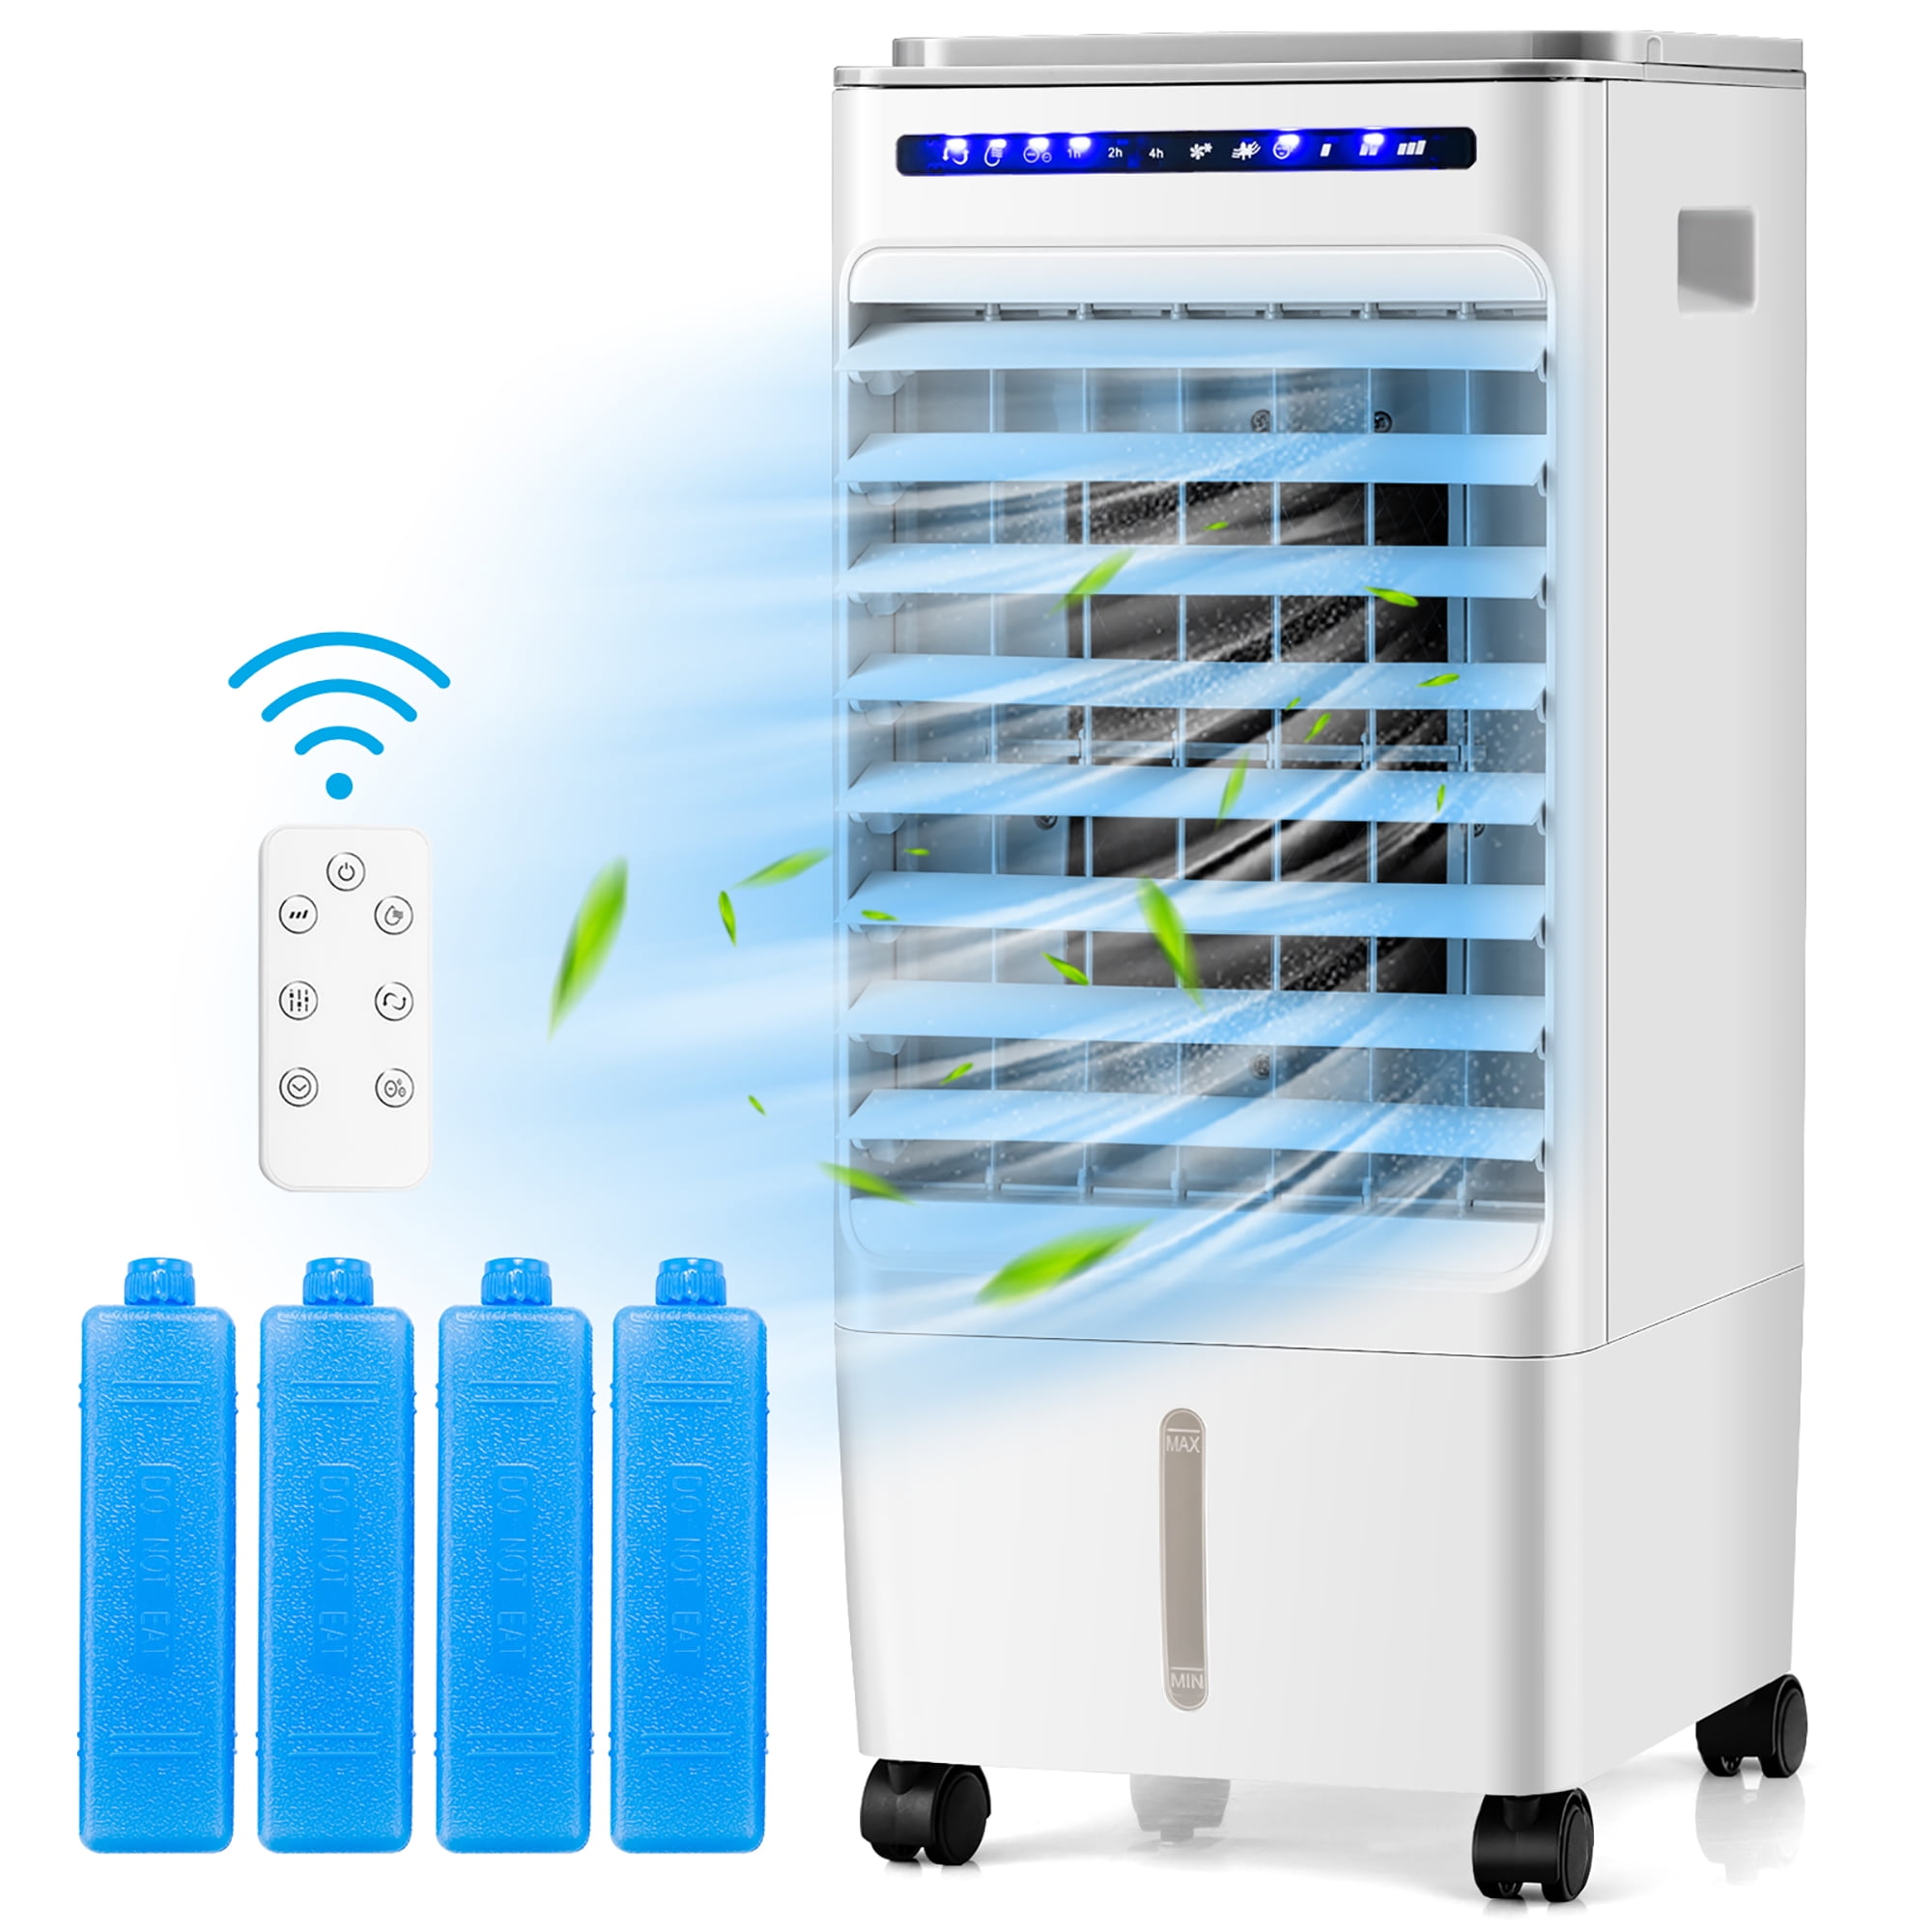 Details about   Evaporative Portable Air Conditioner Cooler Fan with Remote Control 3 Fan Modes 